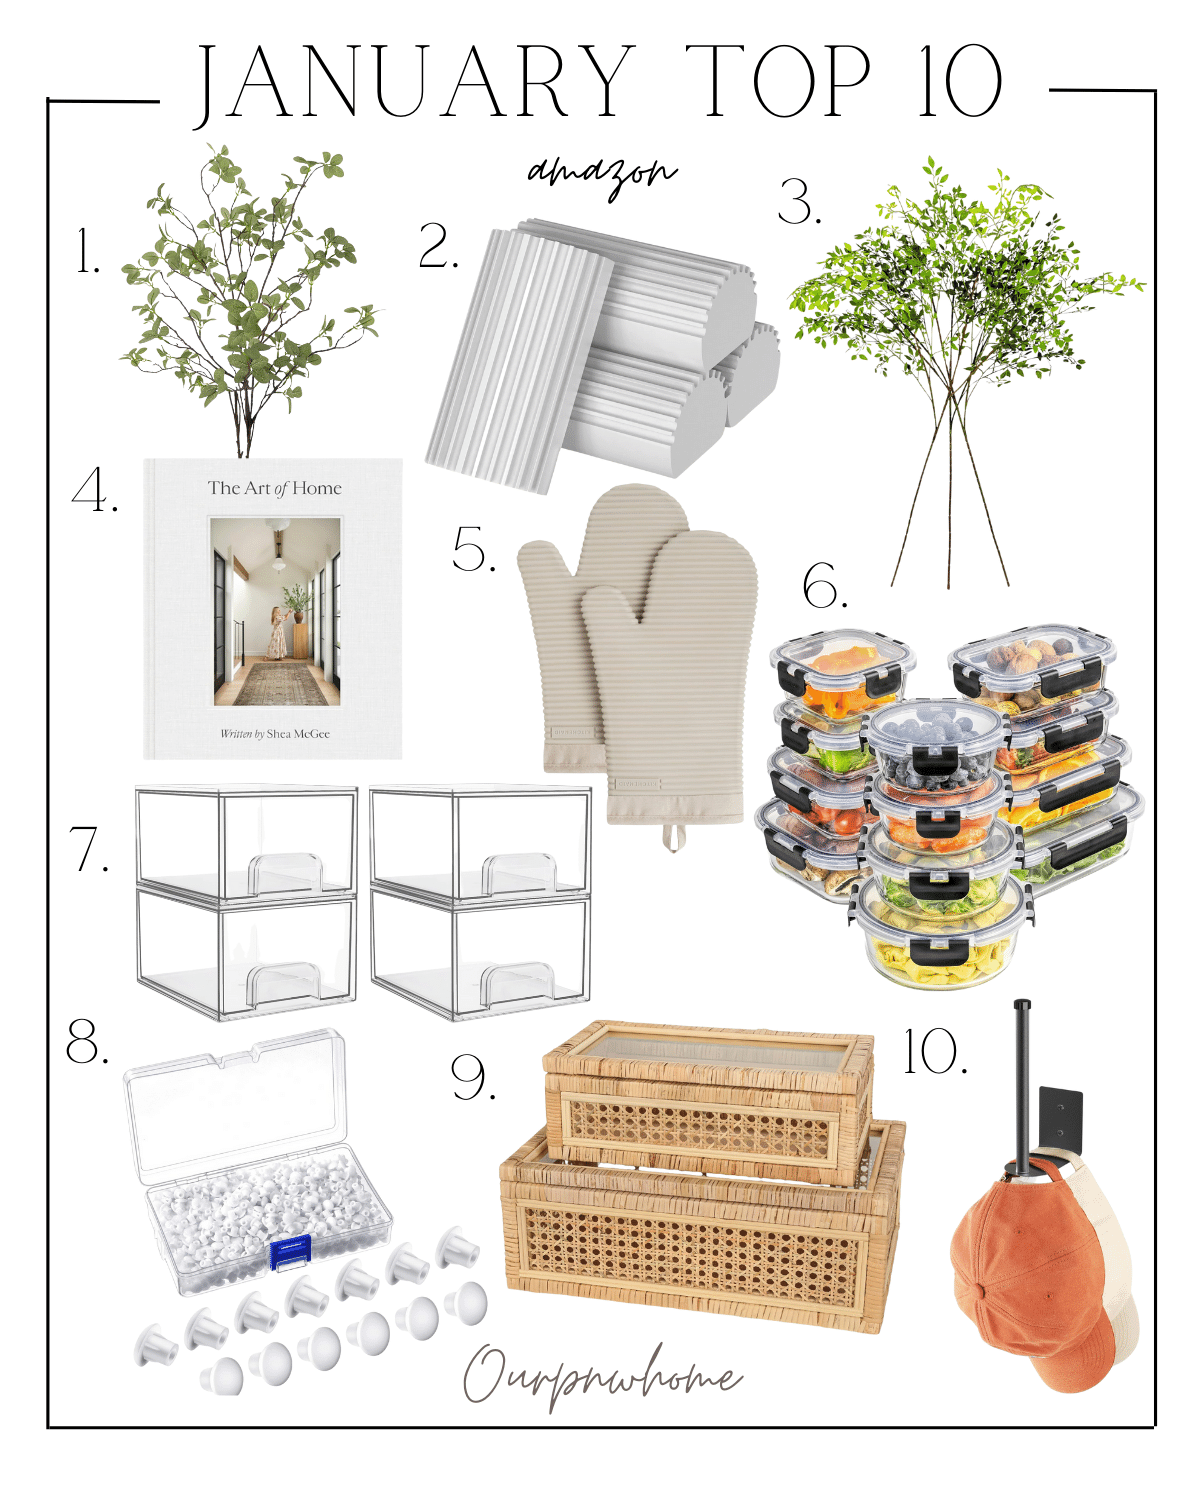 January top 10 best sellers | monthly top sellers, top selling, top sellers, January top 10, home blog, home blogger, neutral home decor, neutral home furniture, stems, kitchen, oven mitt, organization, storage